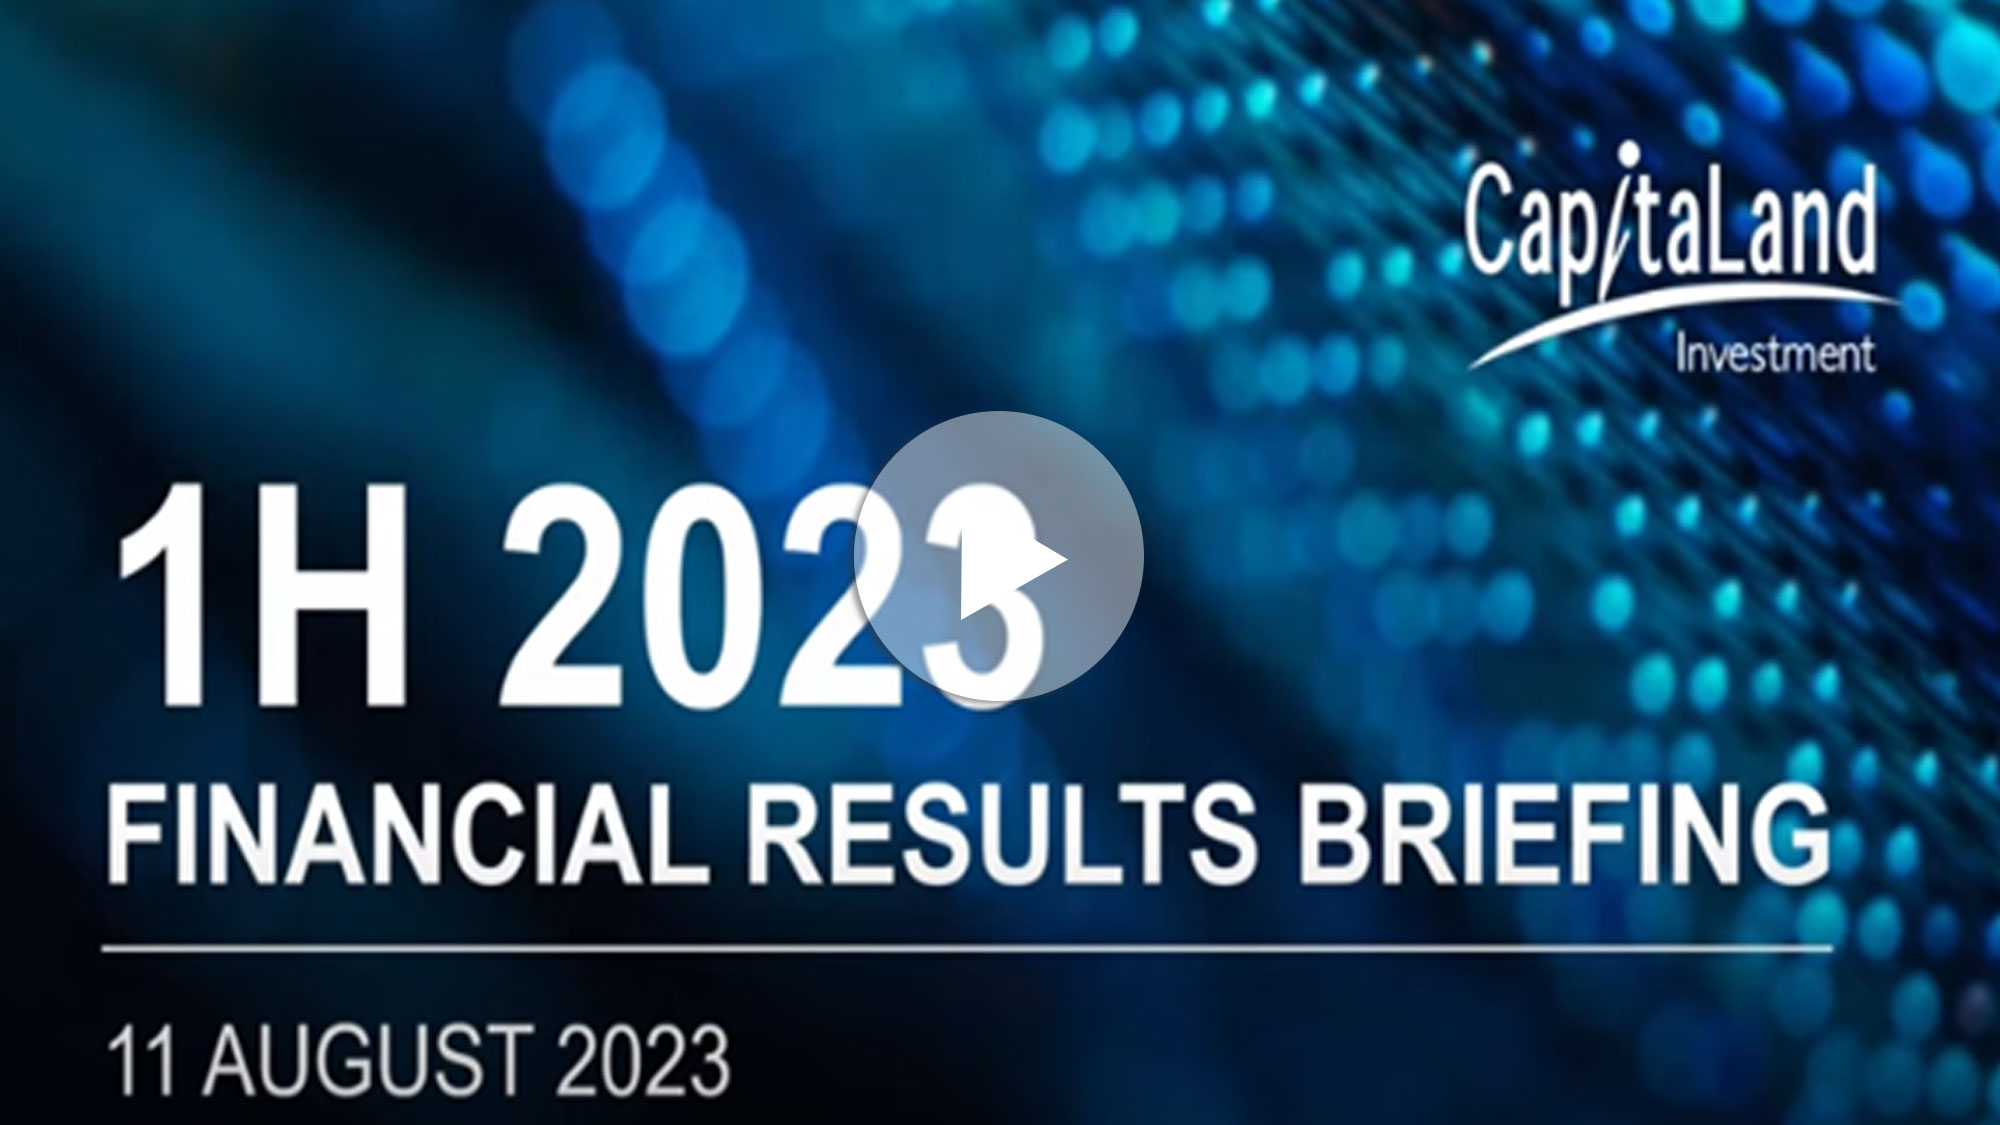 CapitaLand Investment 1H 2023 Financial Results Briefing